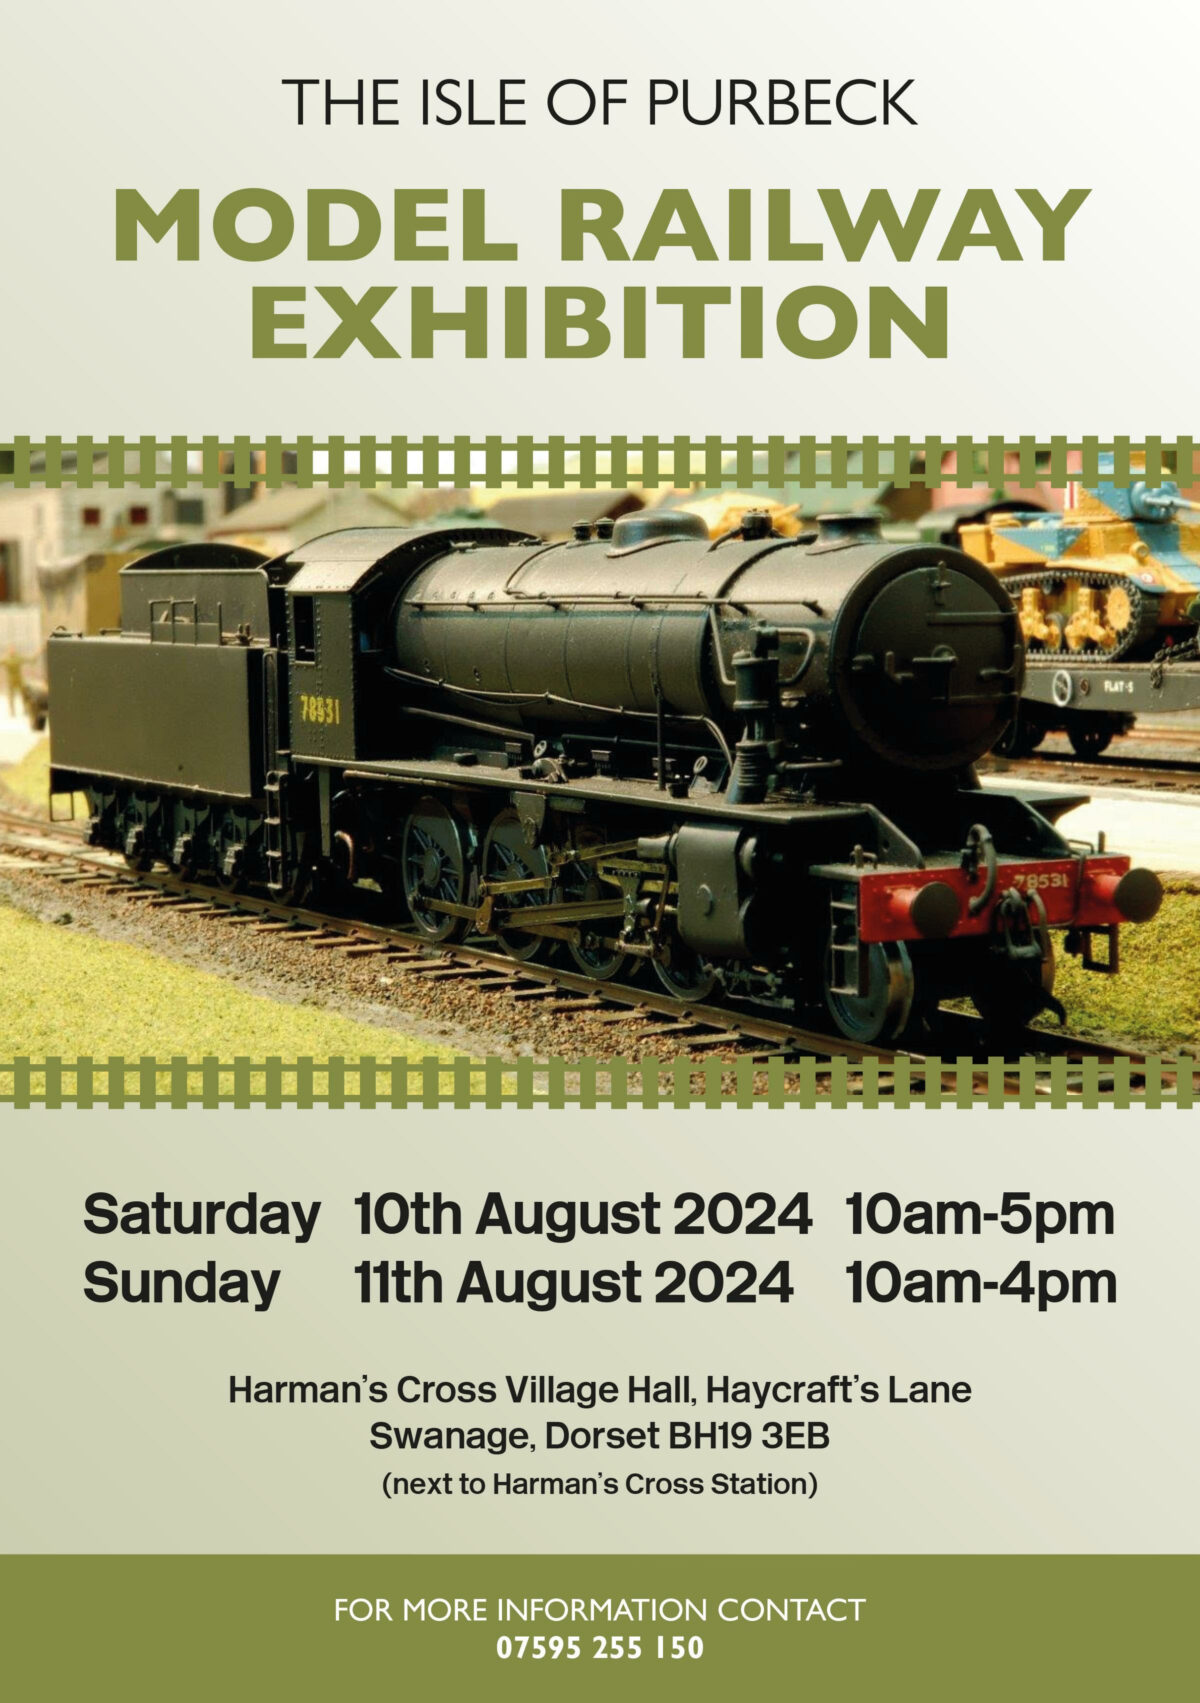 The Isle of Purbeck Model Railway Exhibition poster